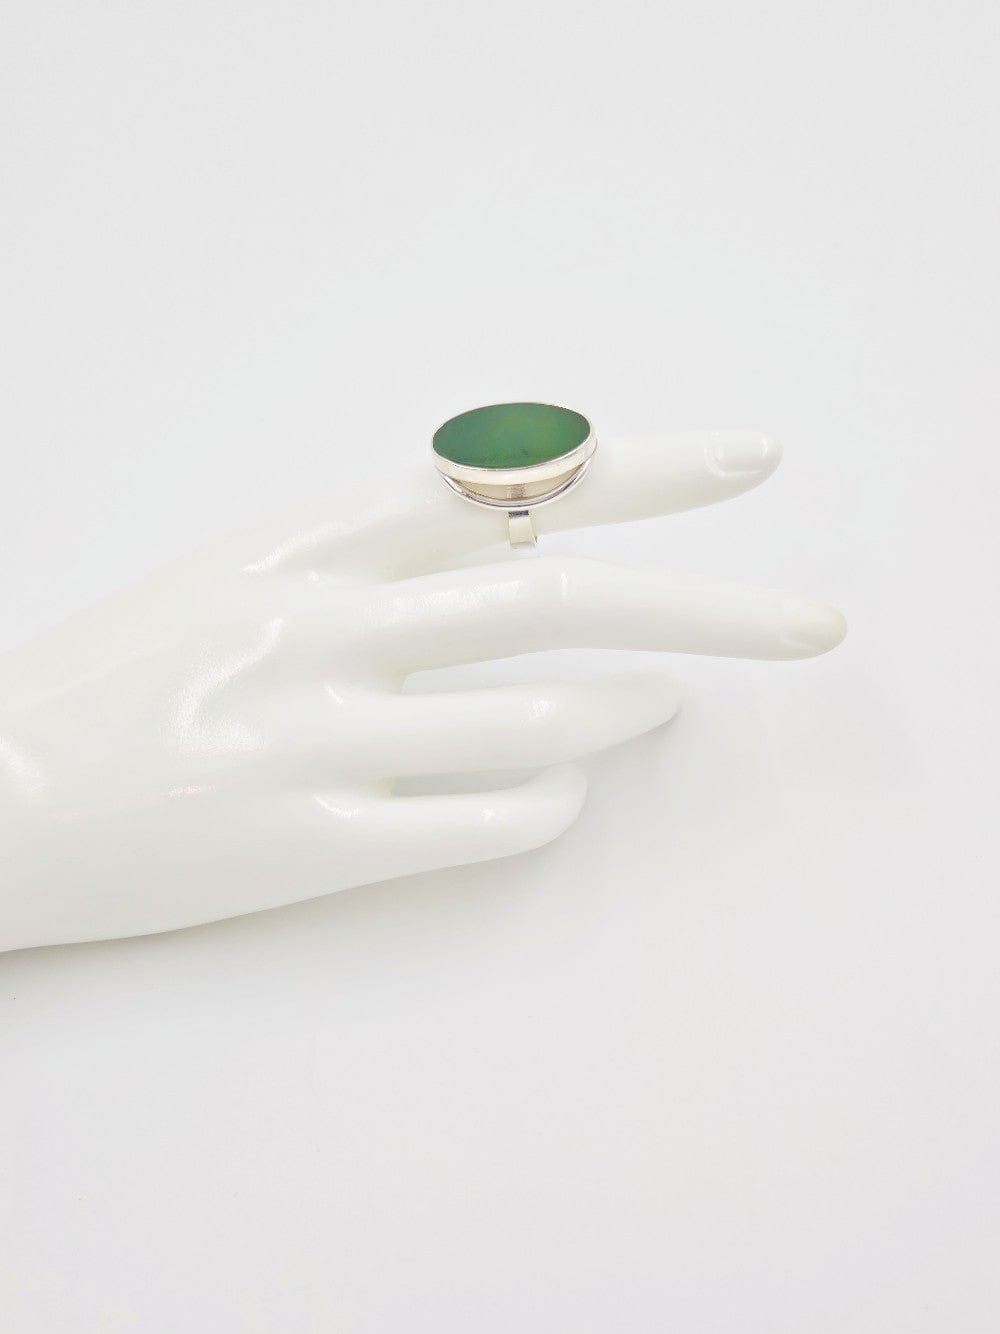 Niels Erik From Jewelry Niels Erik From Denmark Sterling Silver & Nephrite Modernist Ring Circa 1960's